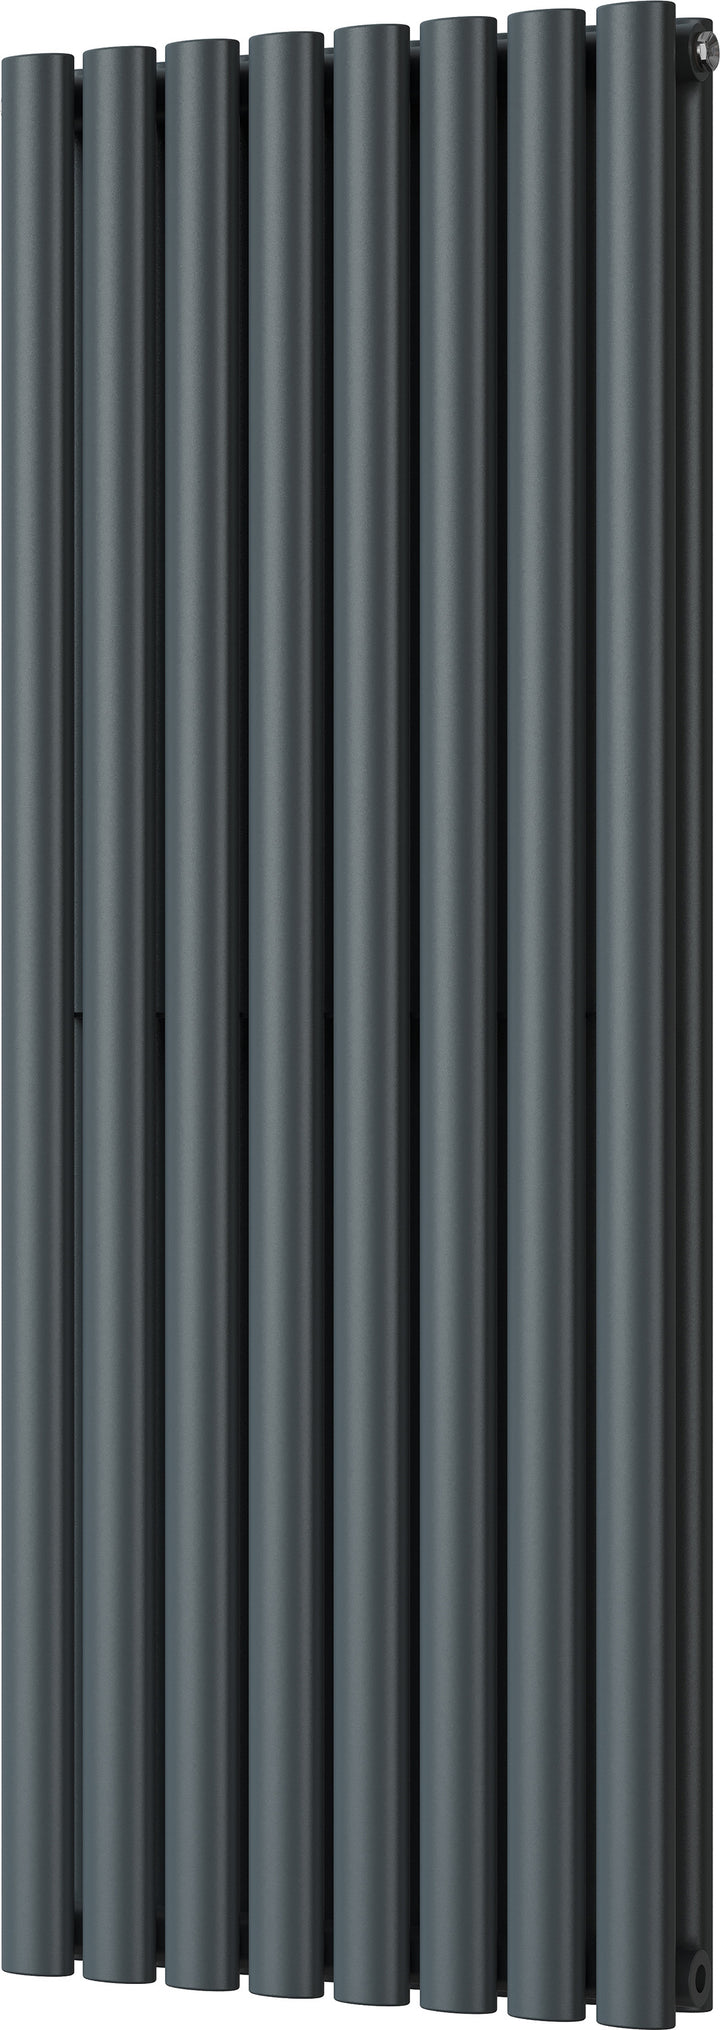 Omeara - Anthracite Vertical Radiator H1200mm x W464mm Double Panel